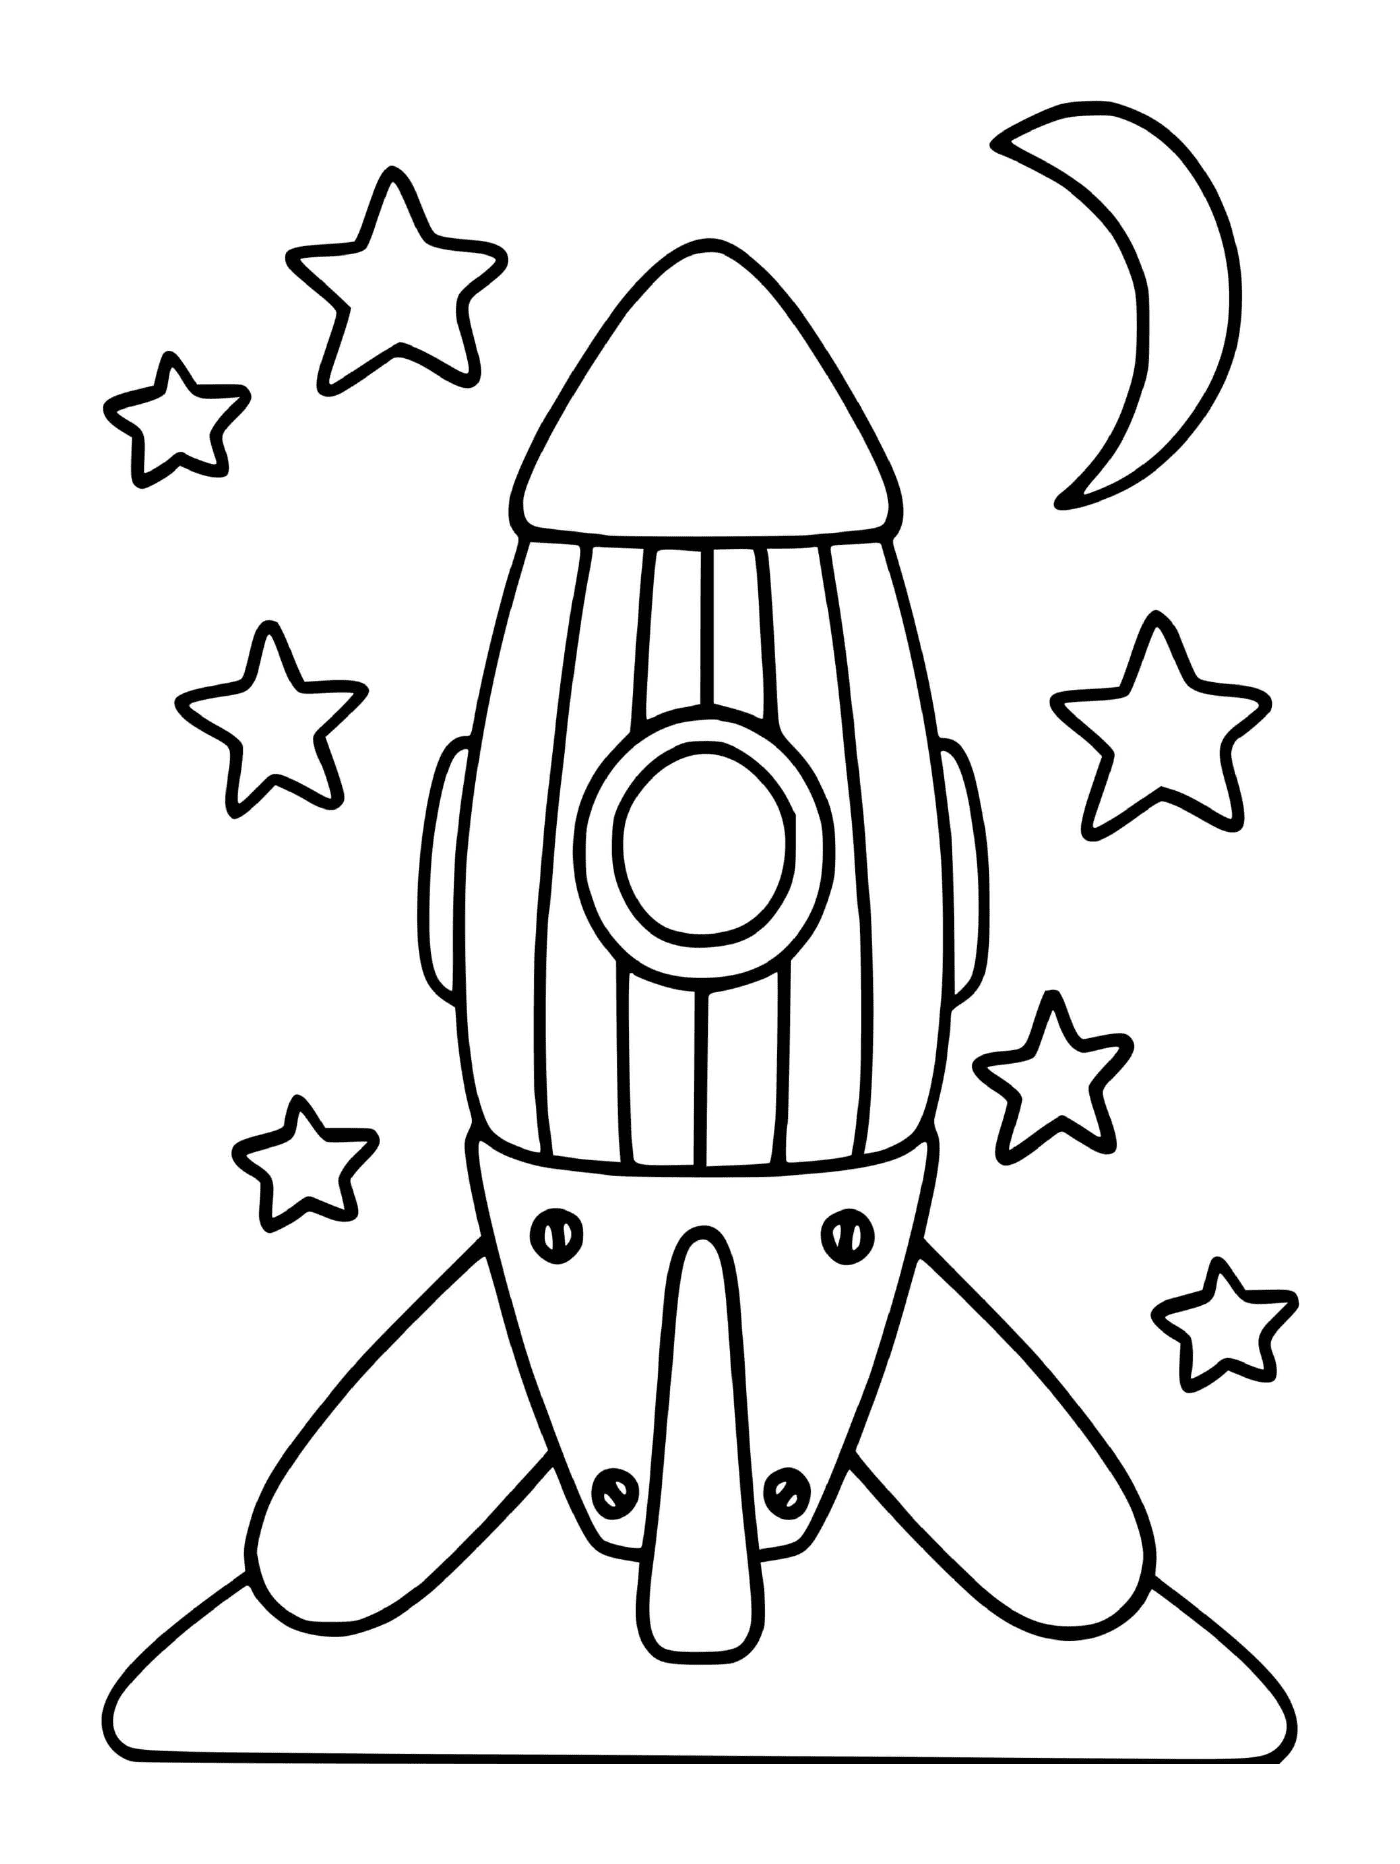  Easy rocket with stars and moon 